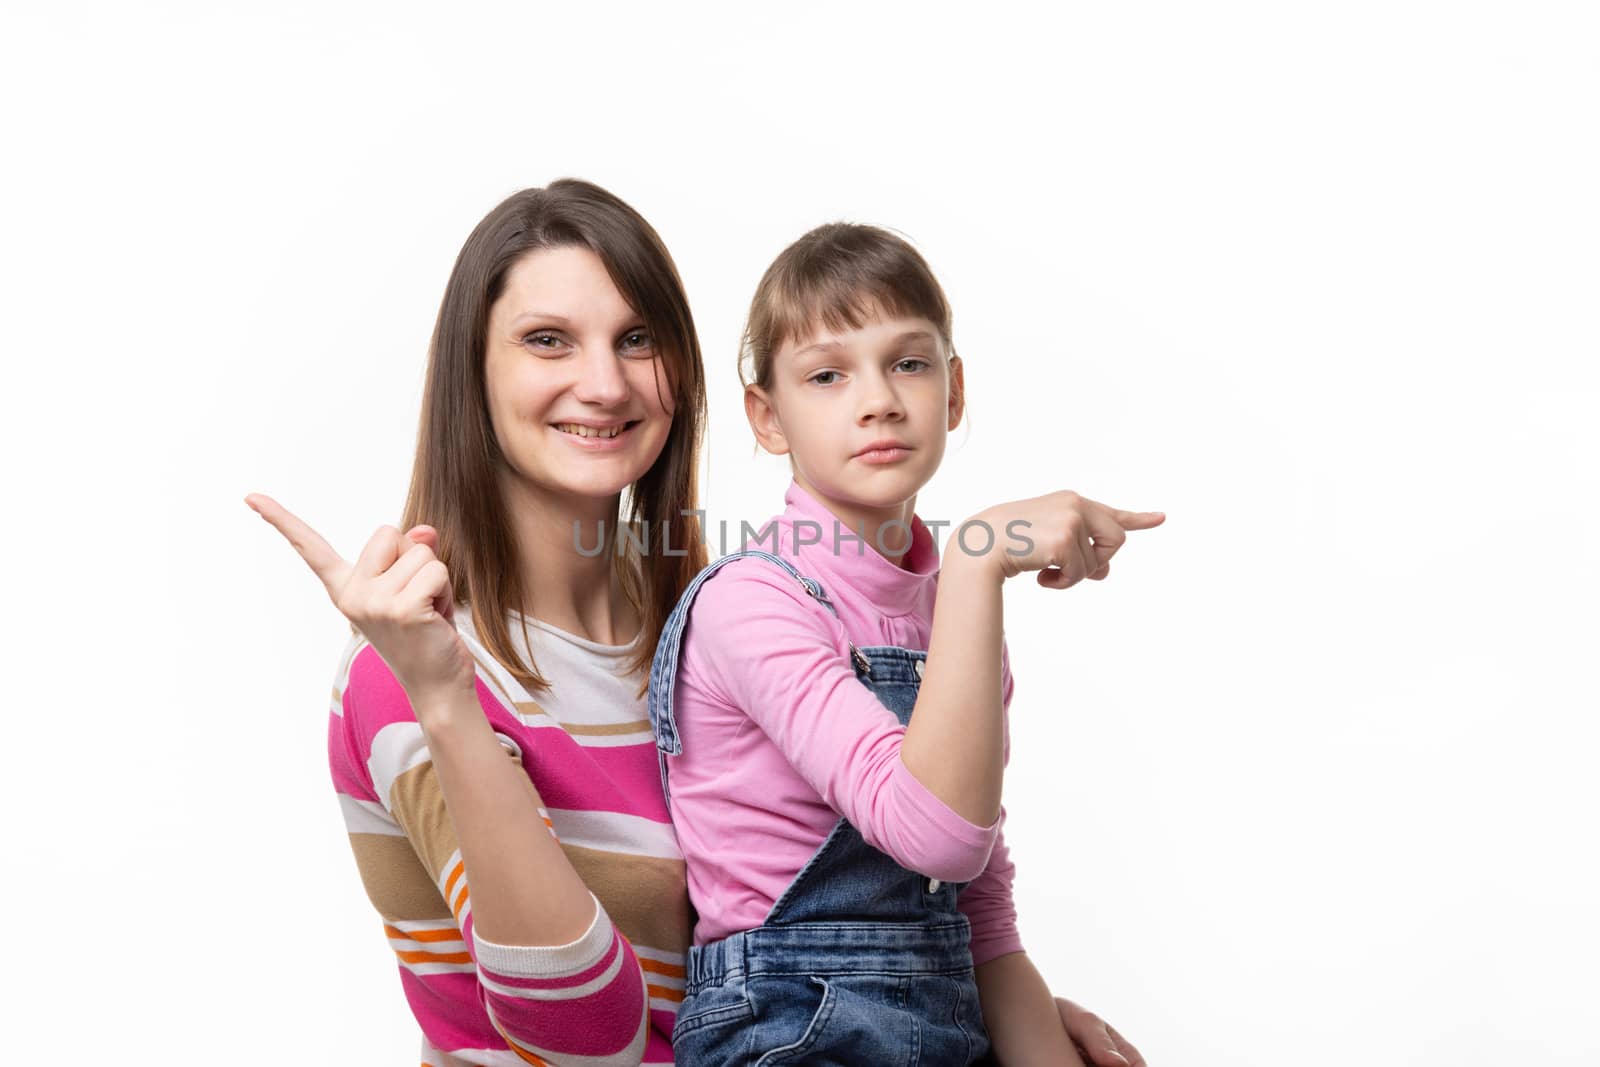 The girl joyfully points a finger in one direction, the girl is sad in the other